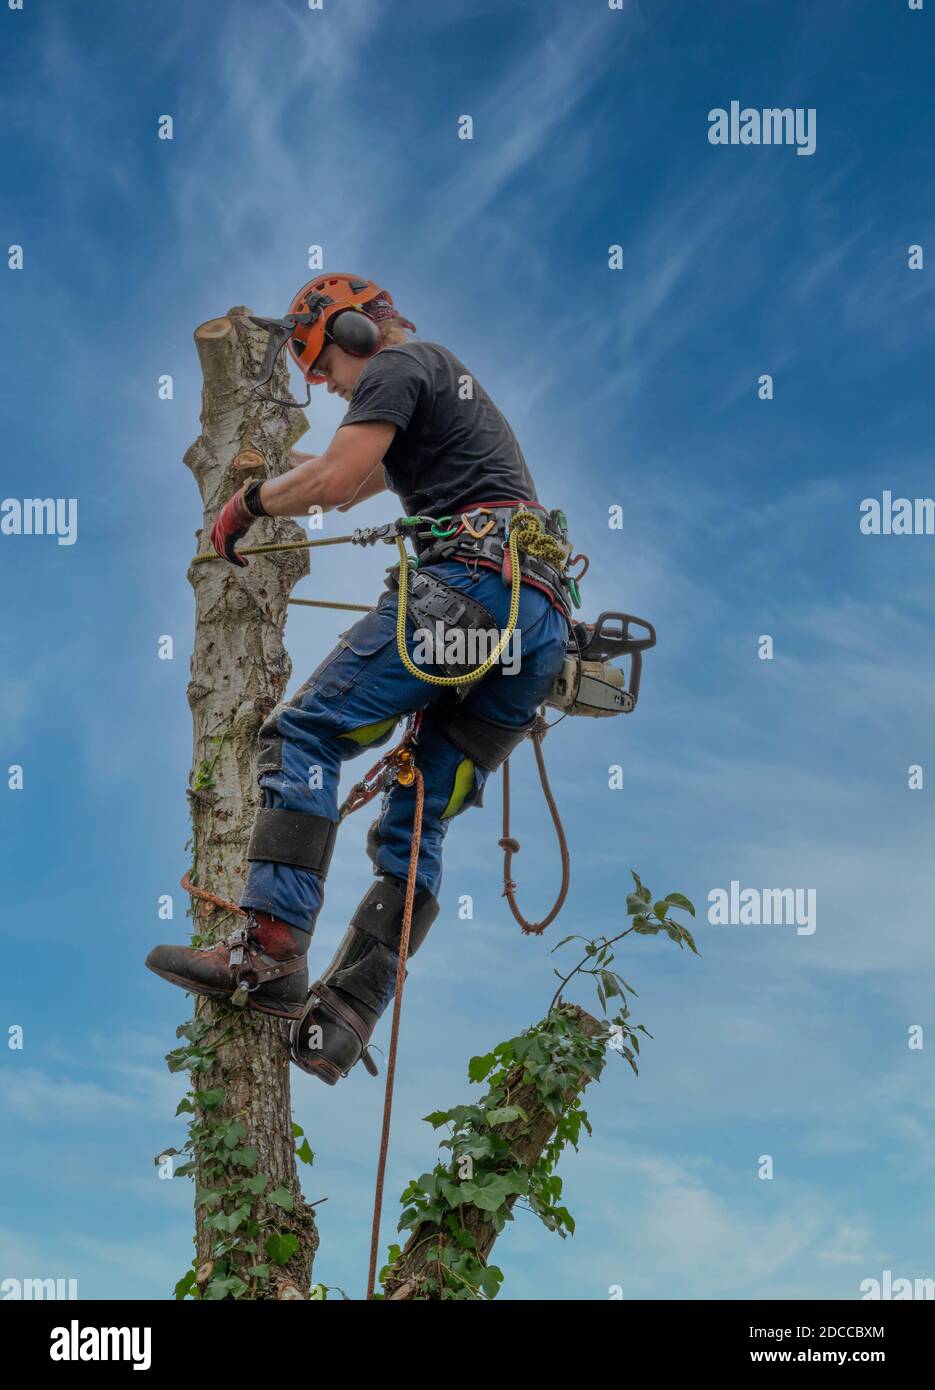 Arborist or Tree Surgeon using a safety rop at the top of a tree. Stock Photo